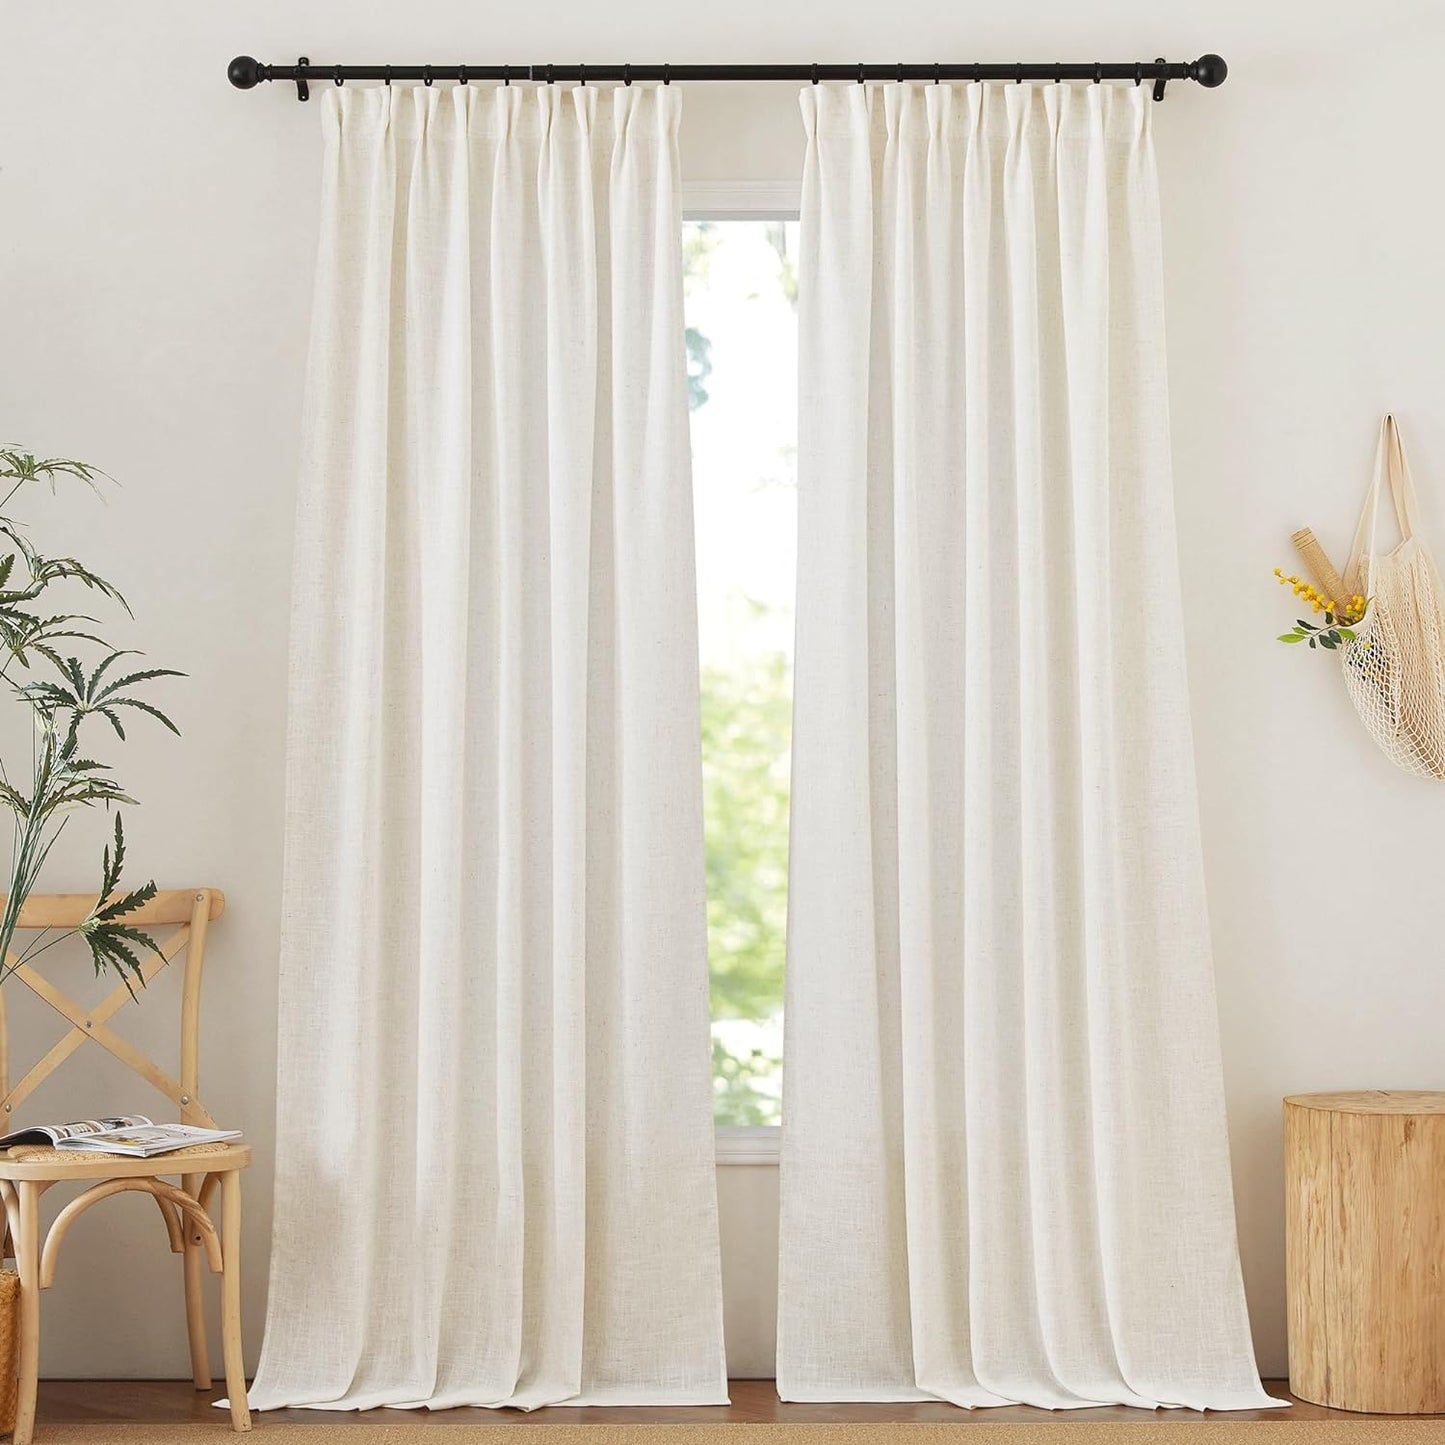 NICETOWN White Curtains Sheer - Semi Sheer Window Covering, Light & Airy Privacy Rod Pocket Back Tab Pinche Pleated Drapes for Bedroom Living Room Patio Glass Door, 52 X 63 Inches Long, Set of 2  NICETOWN Linen W52 X L108 